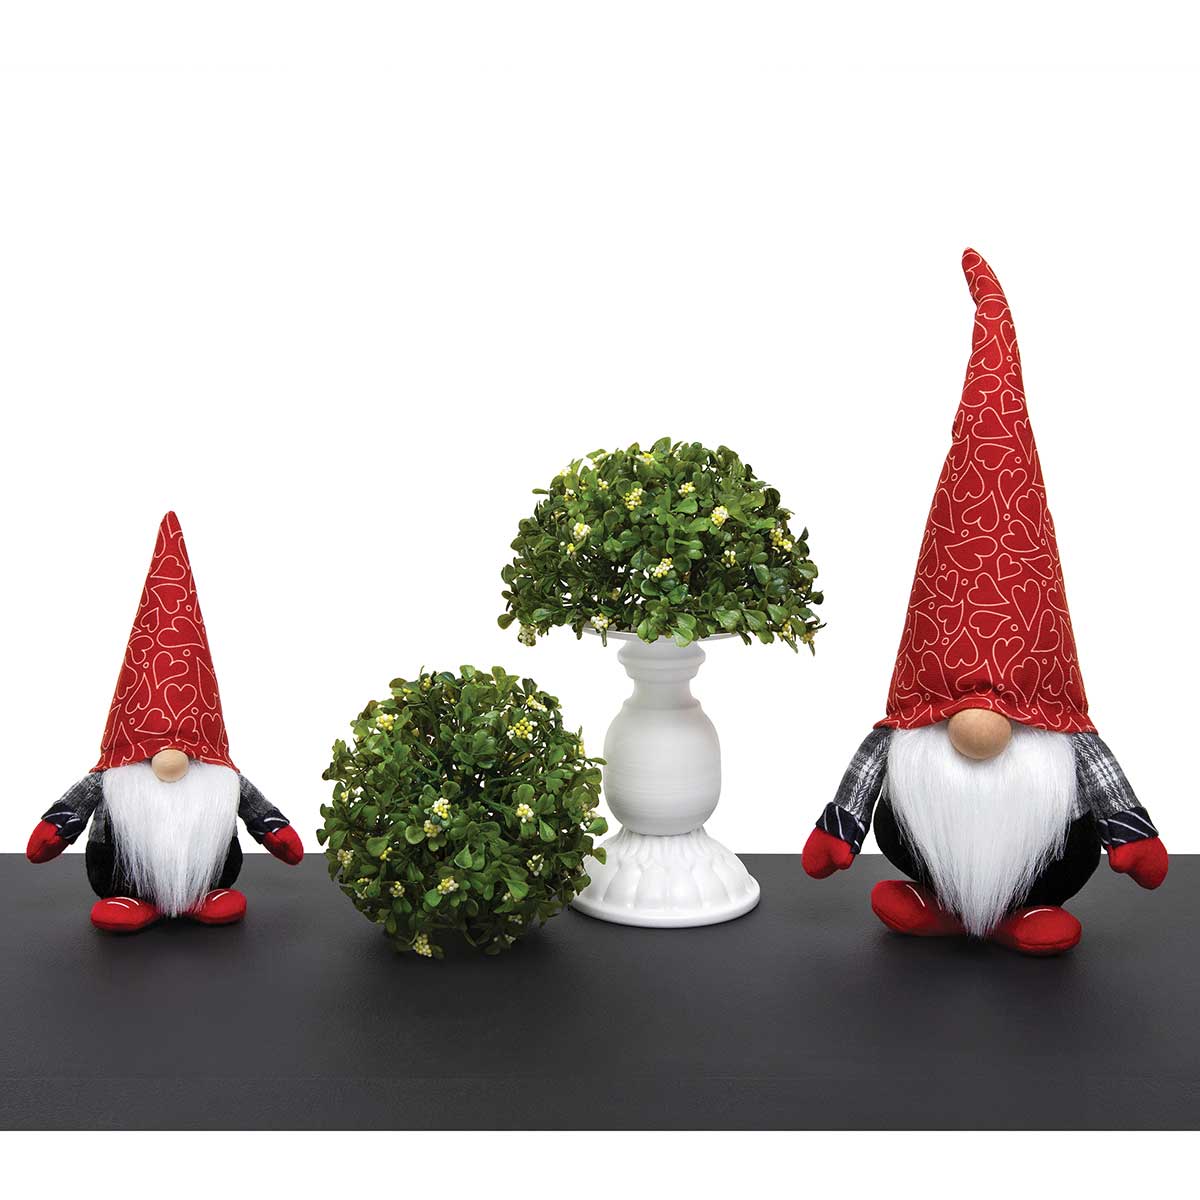 b70 GNOME ROMEO HEART HAT SMAL 4.25IN X 3.25IN X 7.5IN RED/BLACK - Click Image to Close